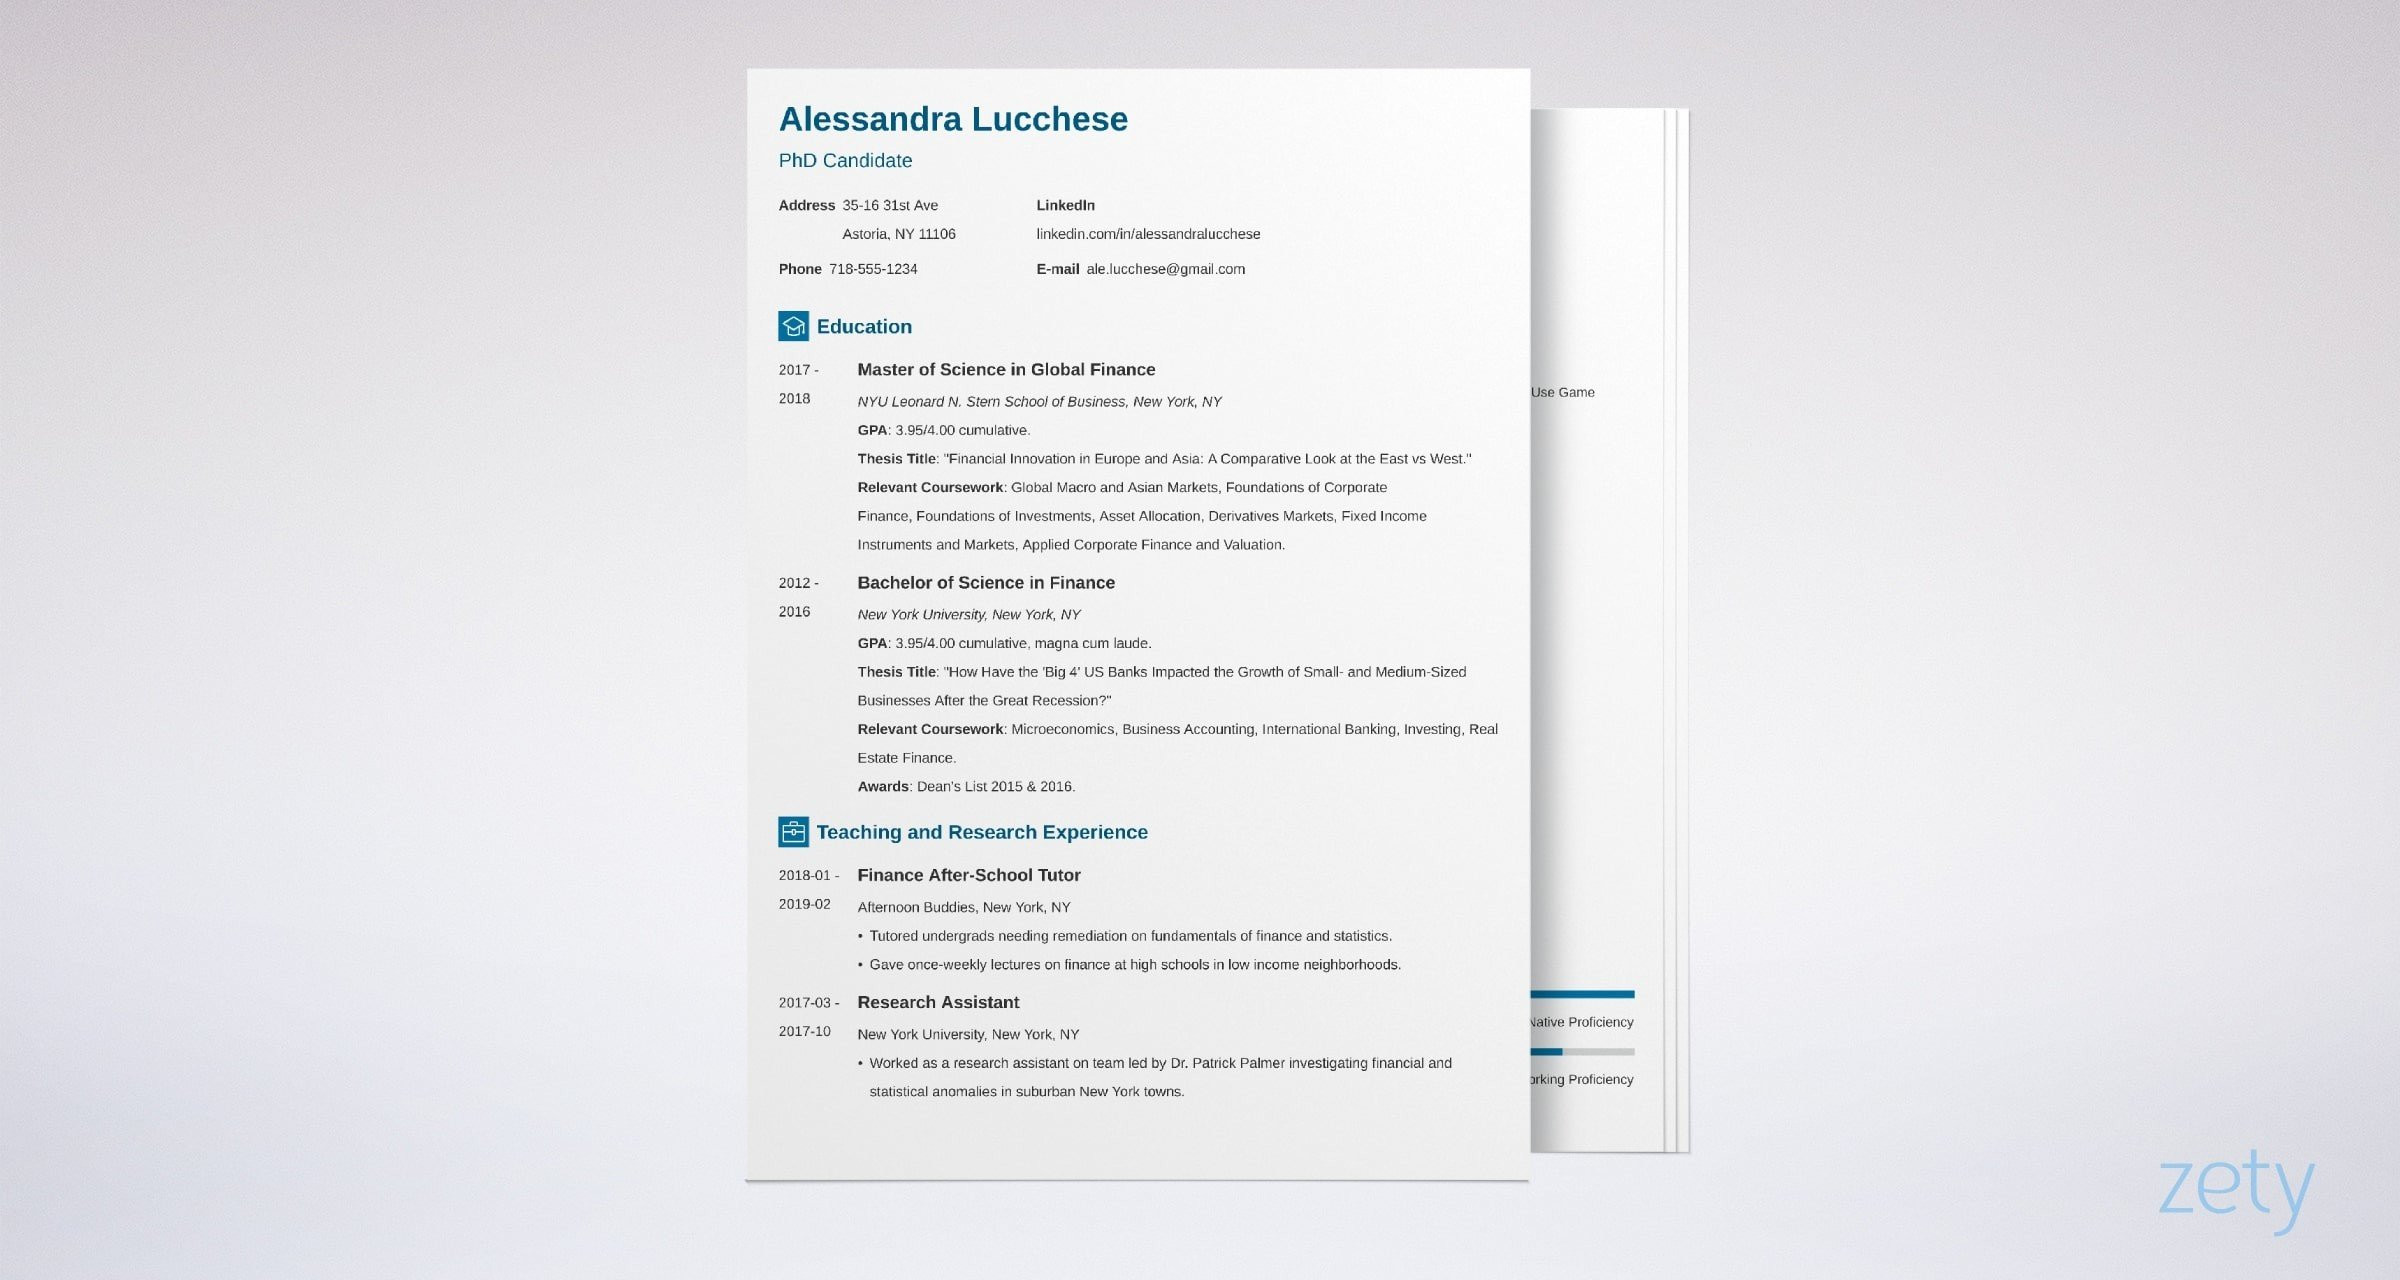 Resume for Masters Application Sample for International Students Resume for Graduate School Application [template & Examples]